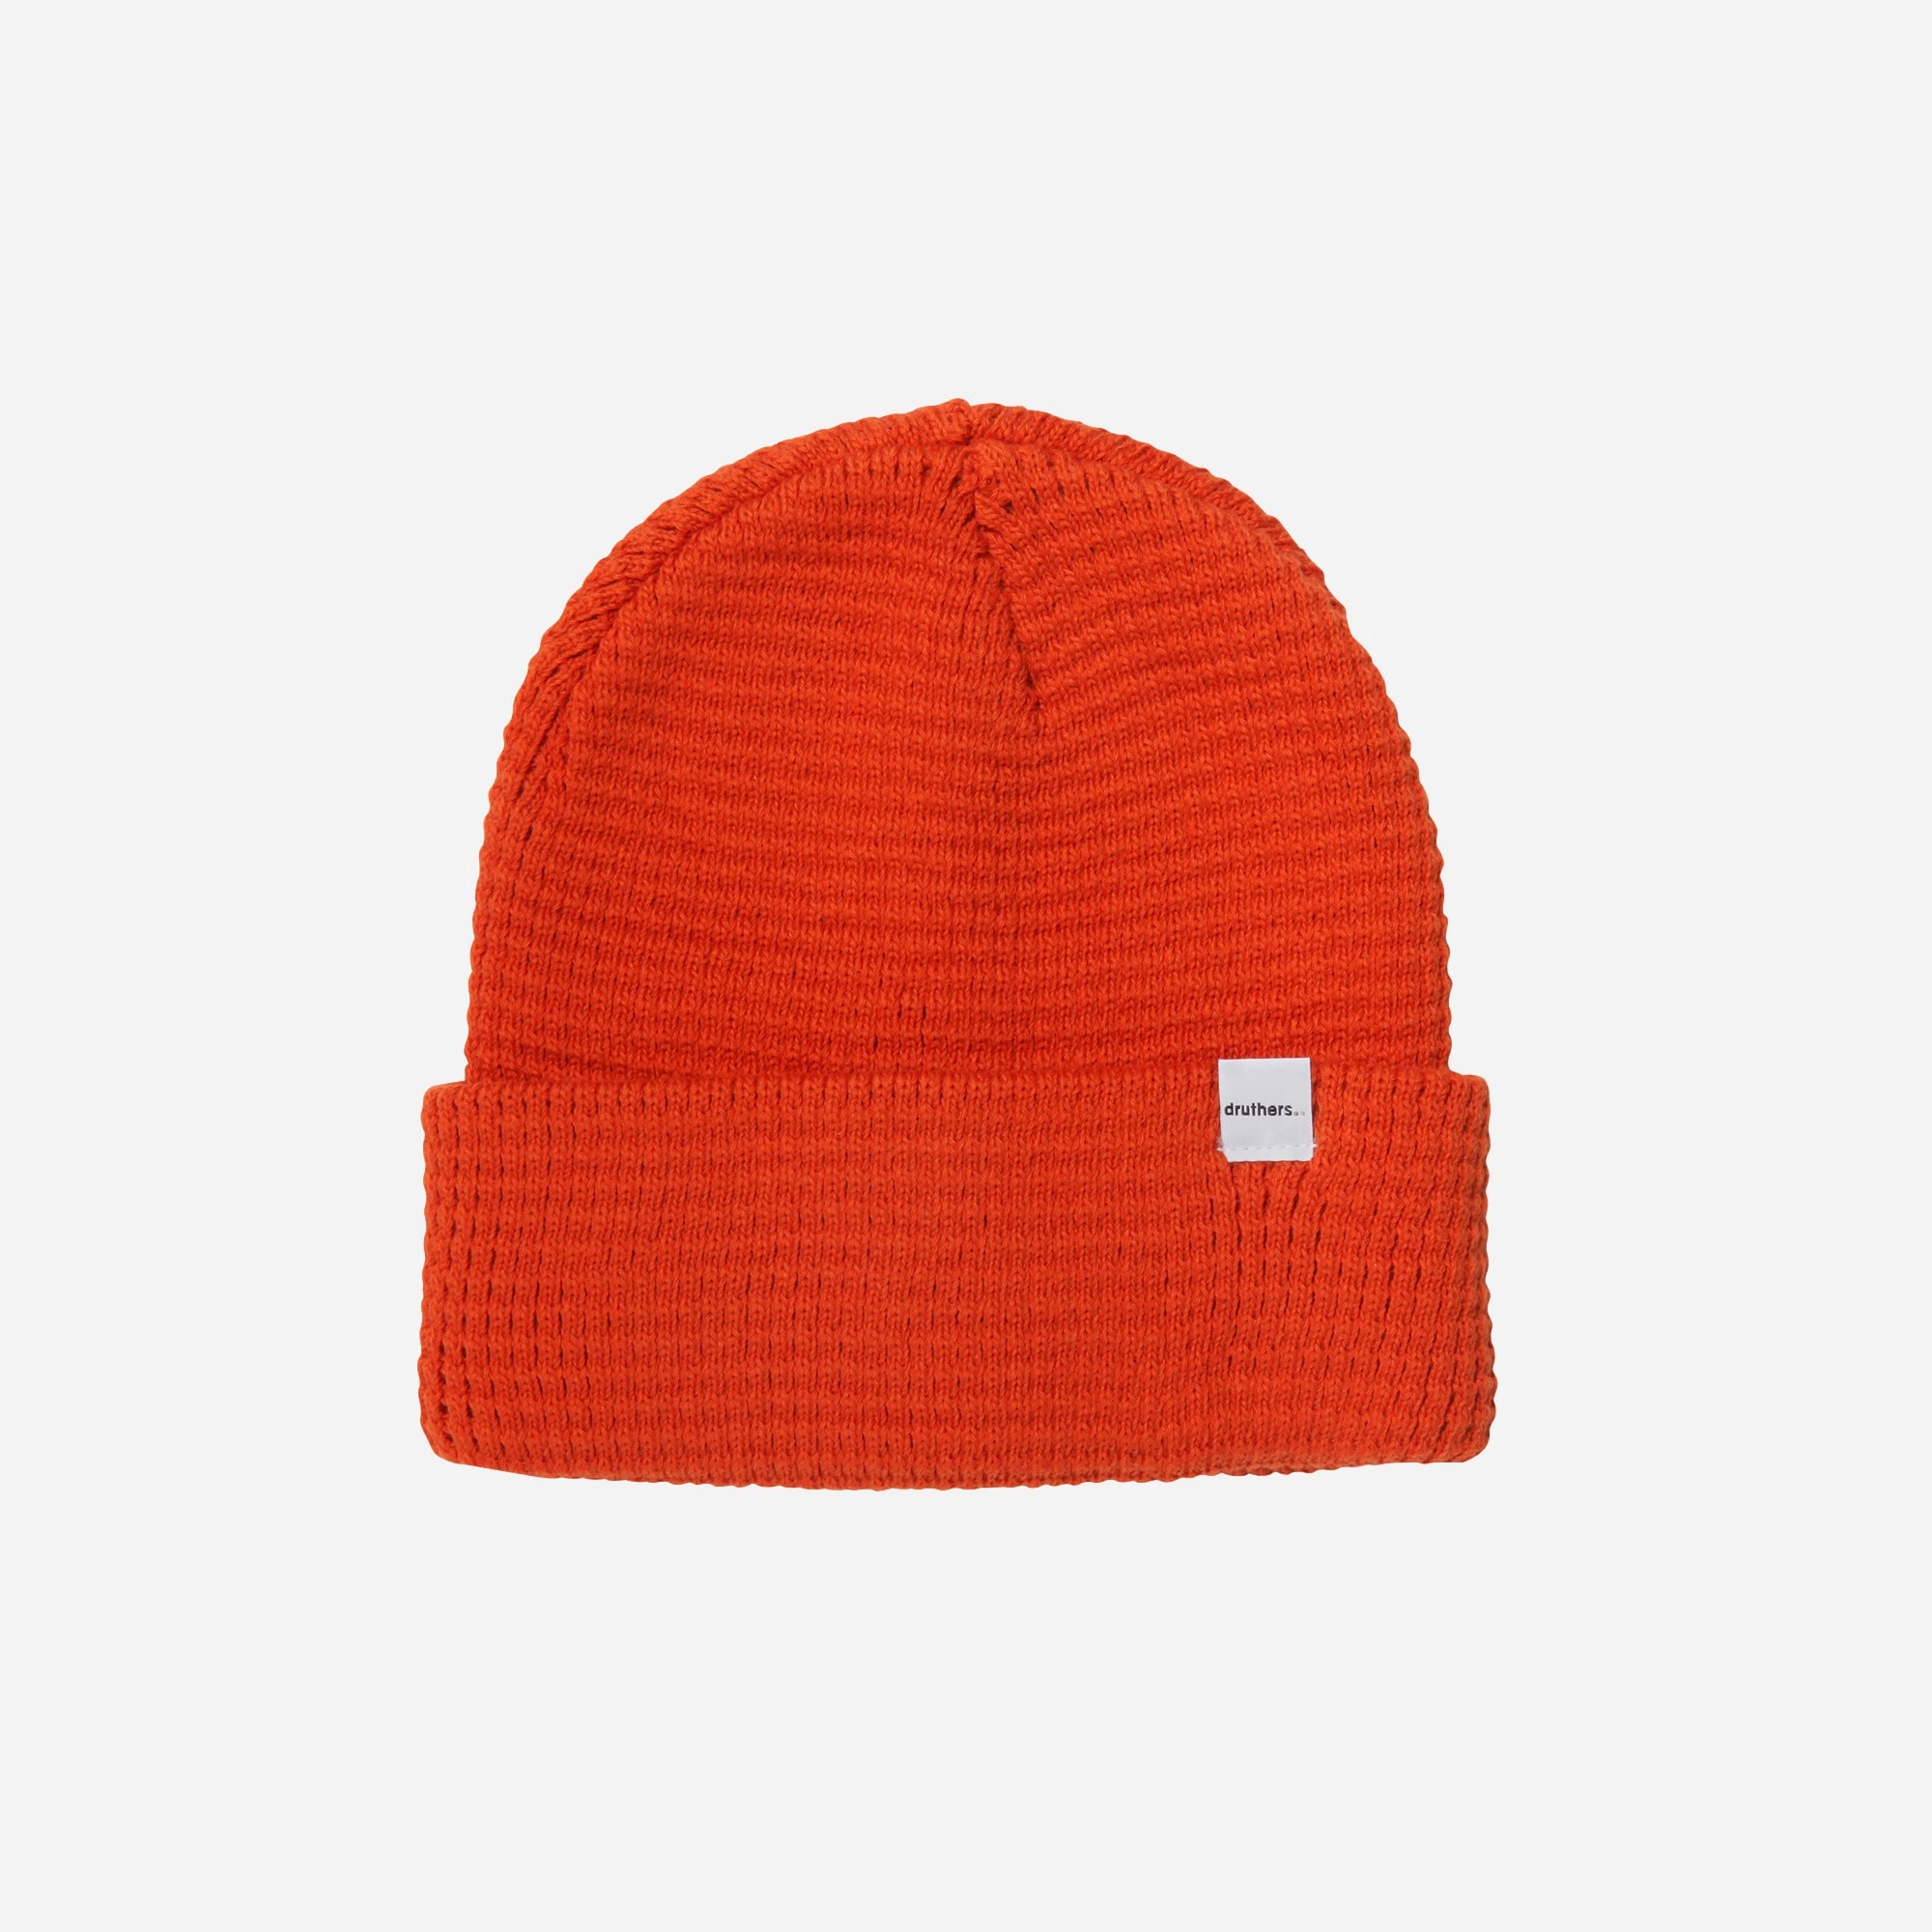 mens Druthers™ waffle-knit beanie